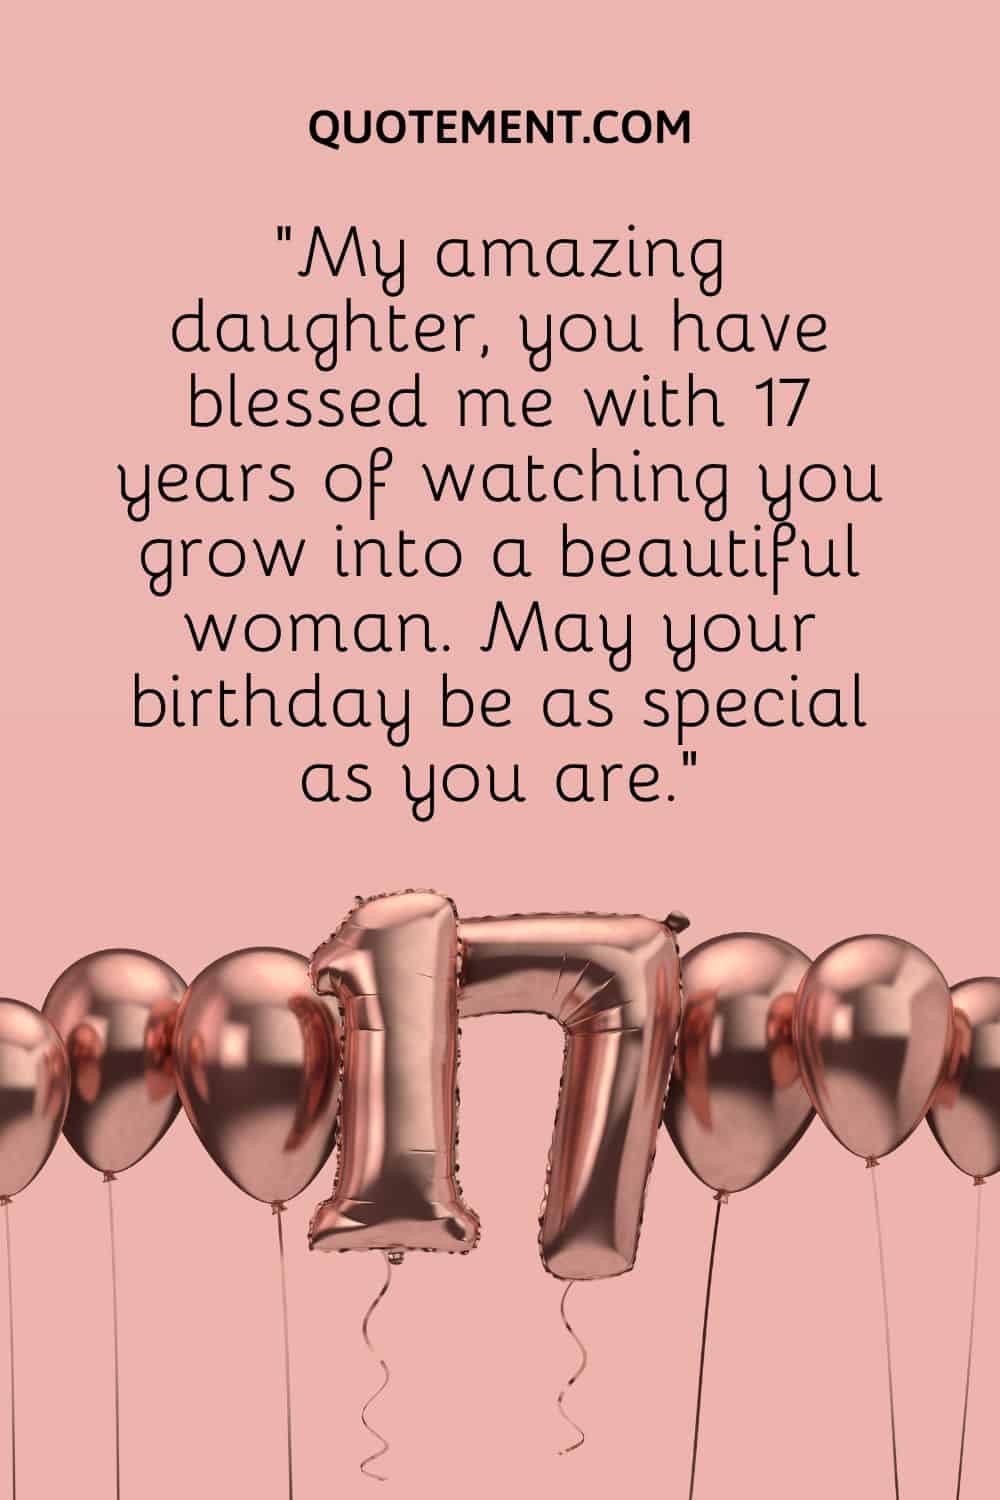 “My amazing daughter, you have blessed me with 17 years of watching you grow into a beautiful woman. May your birthday be as special as you are.”